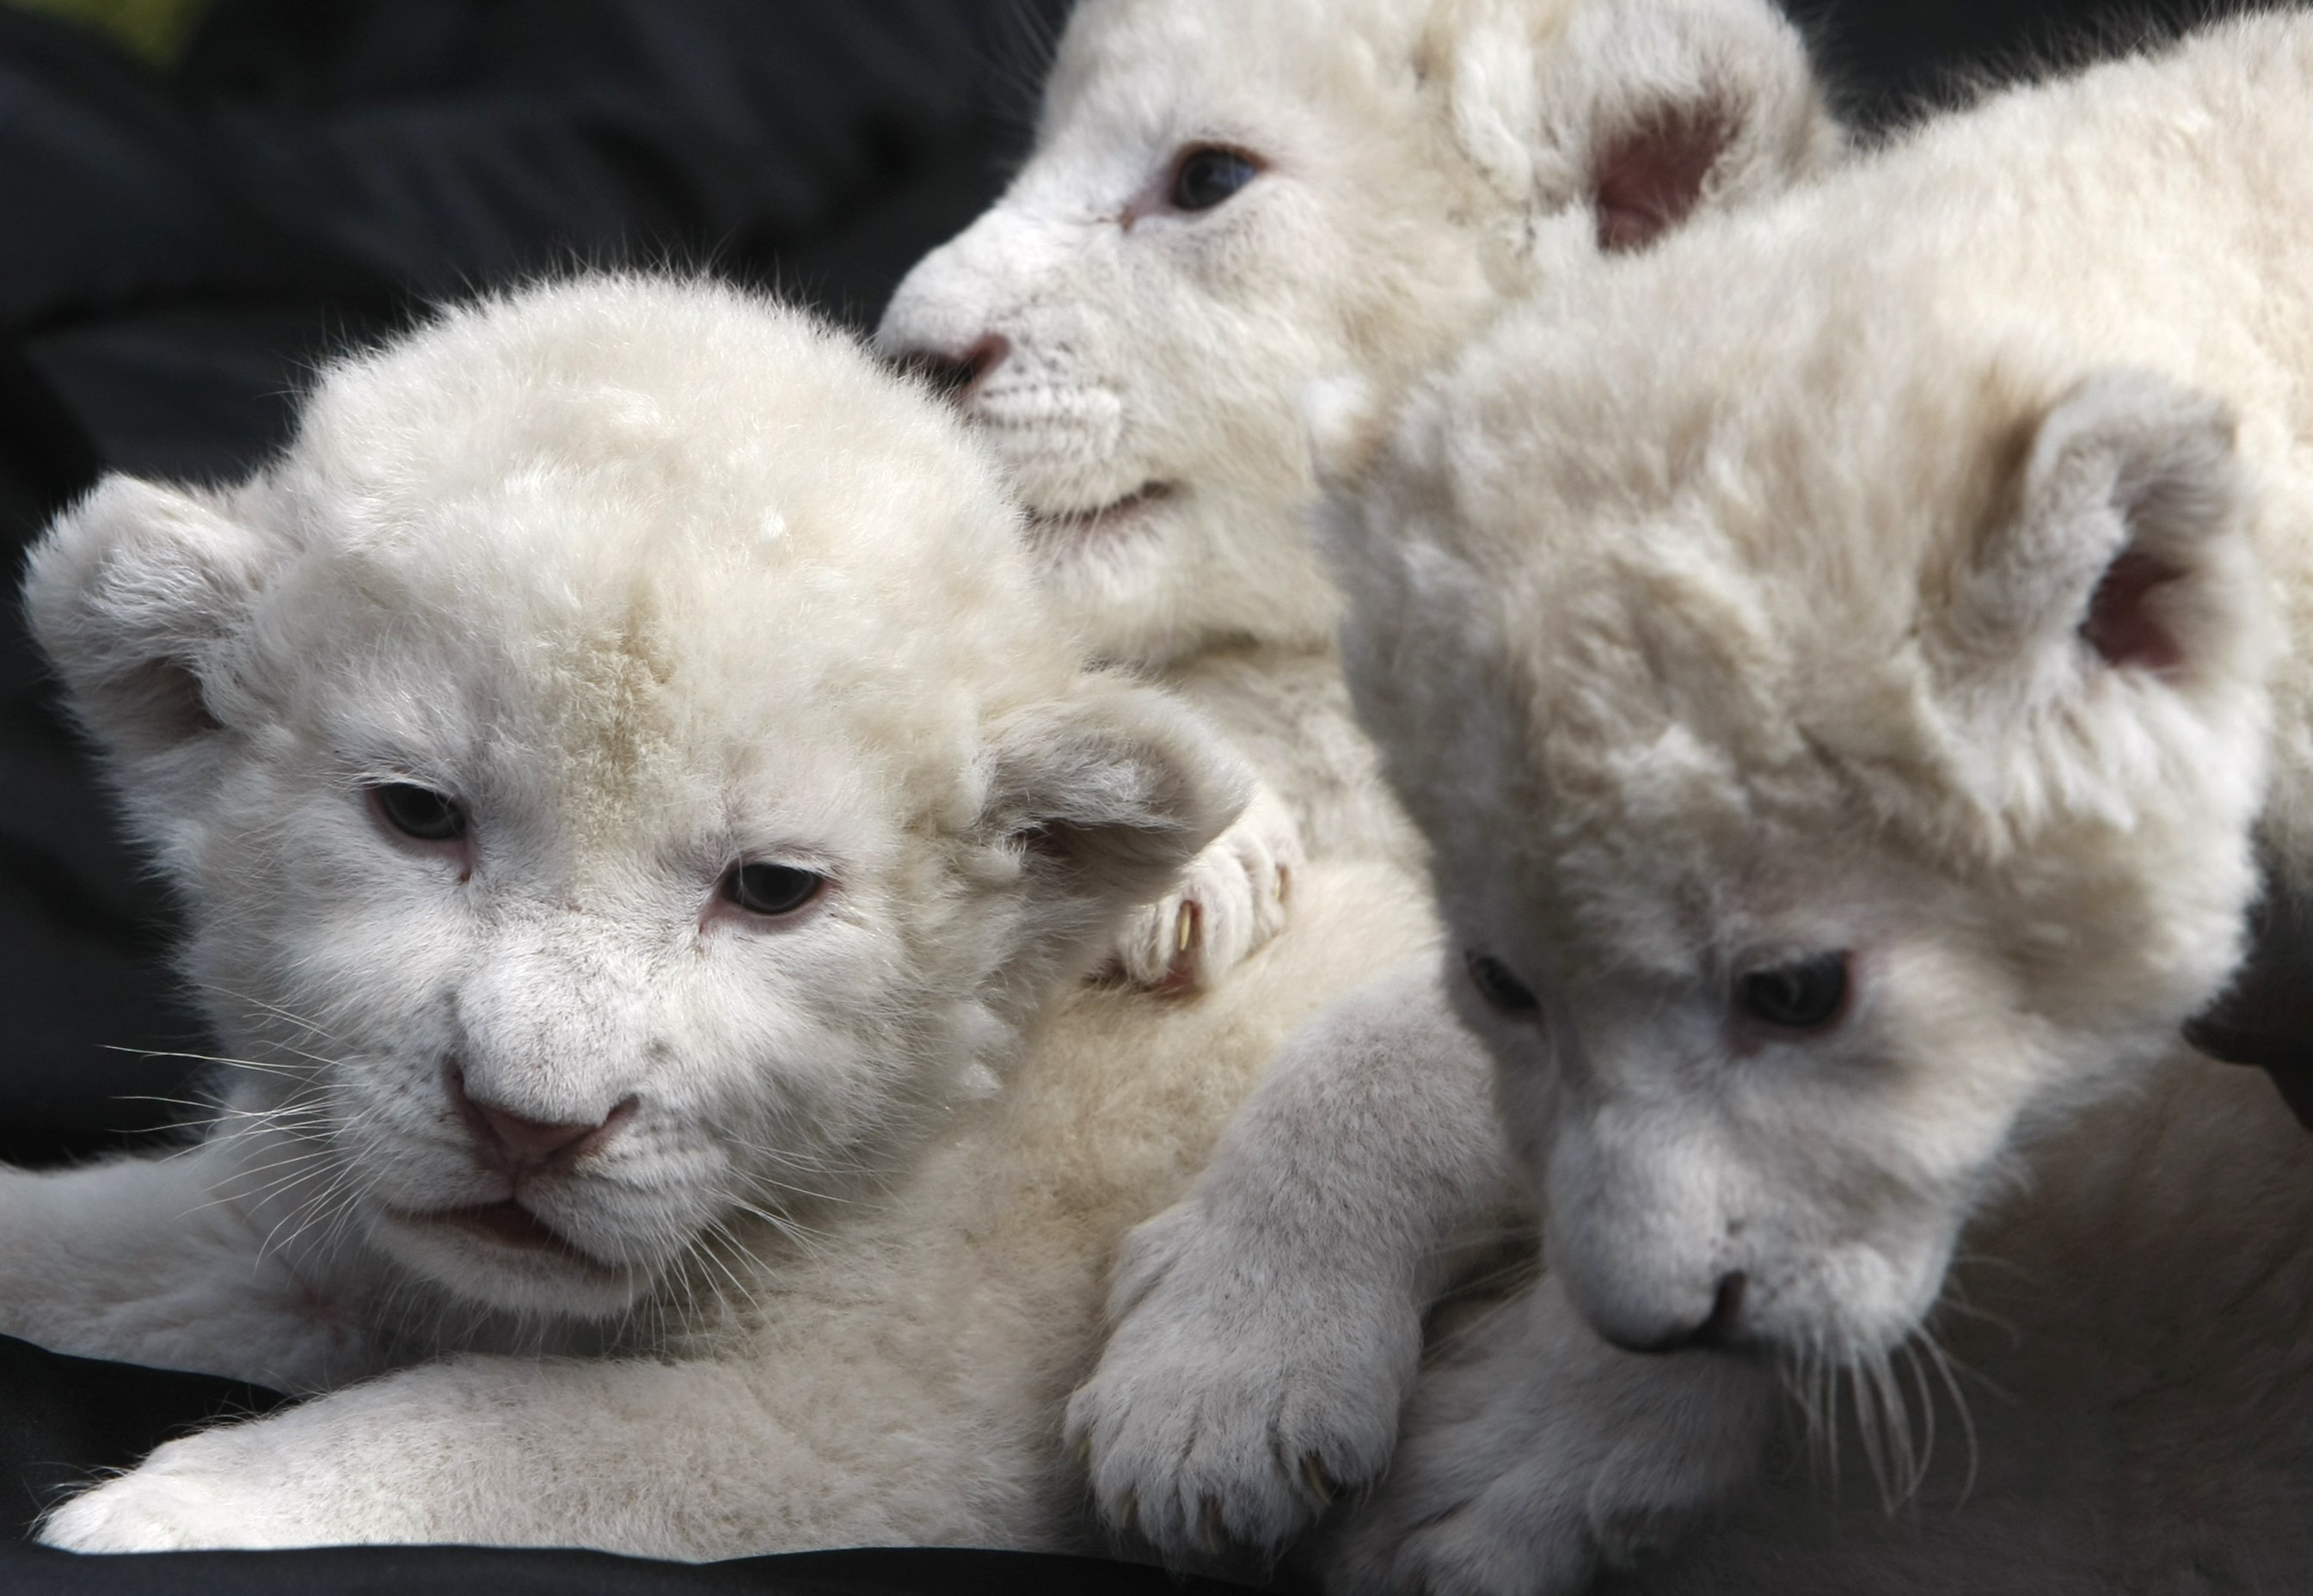 Lion cubs hand-fed in German zoo